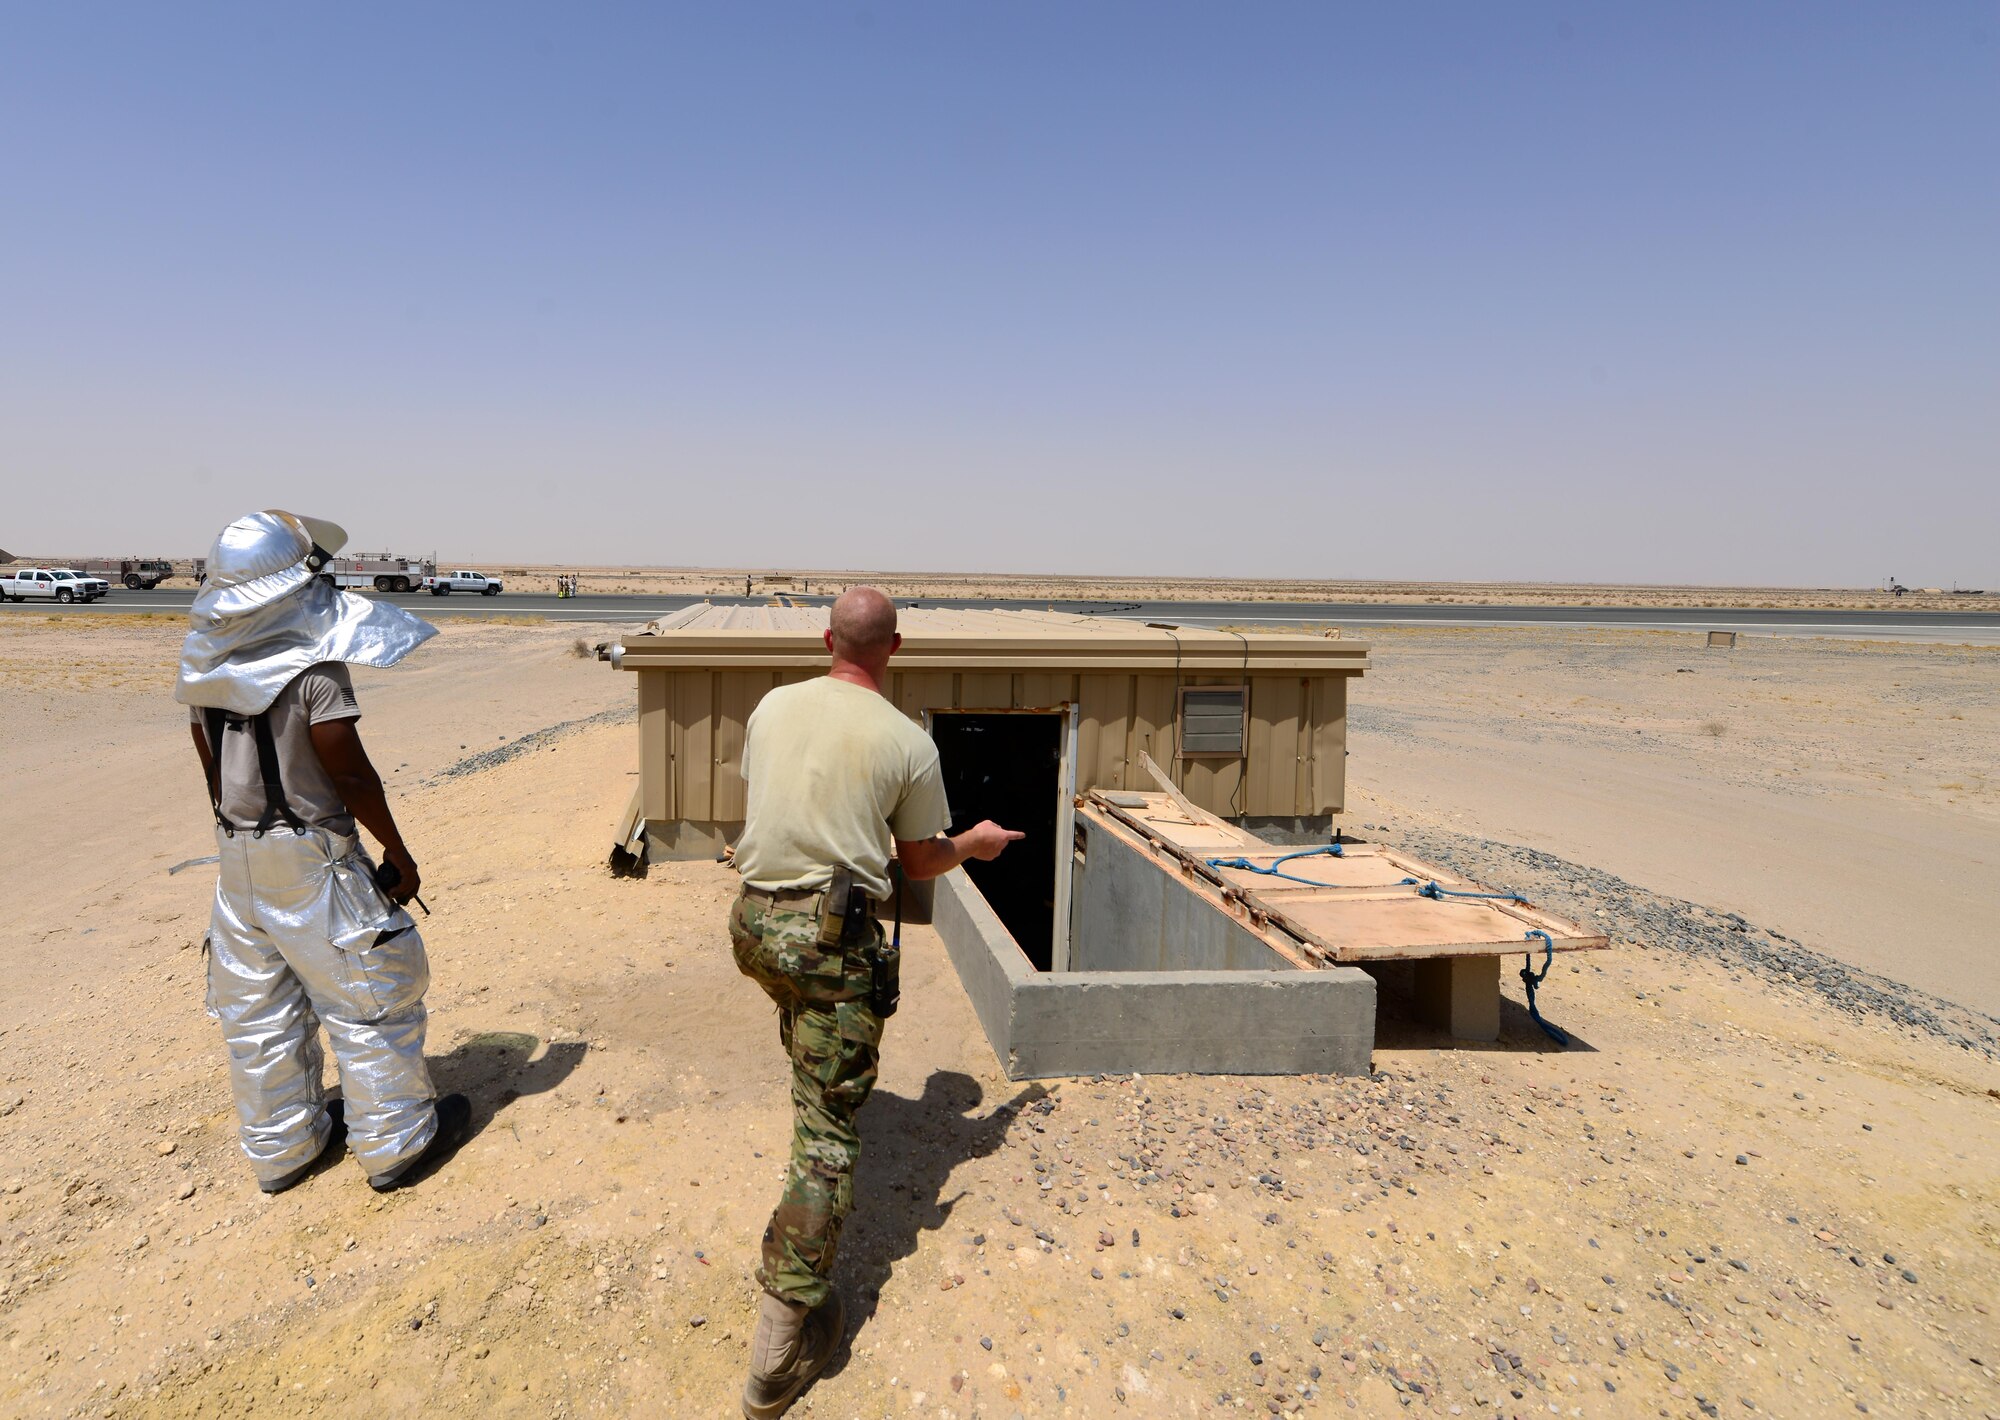 U.S. Air Force power production technicians assigned to the 407th Expeditionary Civil Engineer Squadron, wind up the cable from the Barrier Arresting Kit (BAK-12) in Southwest Asia on July 3, 2017. 407th ECES conducted an Aircraft Arresting System engagement with an Italian AMX A-11 Ghibli aircraft during a simulated in-flight emergency. (U.S. Air Force photo by Tech. Sgt. Andy M. Kin)